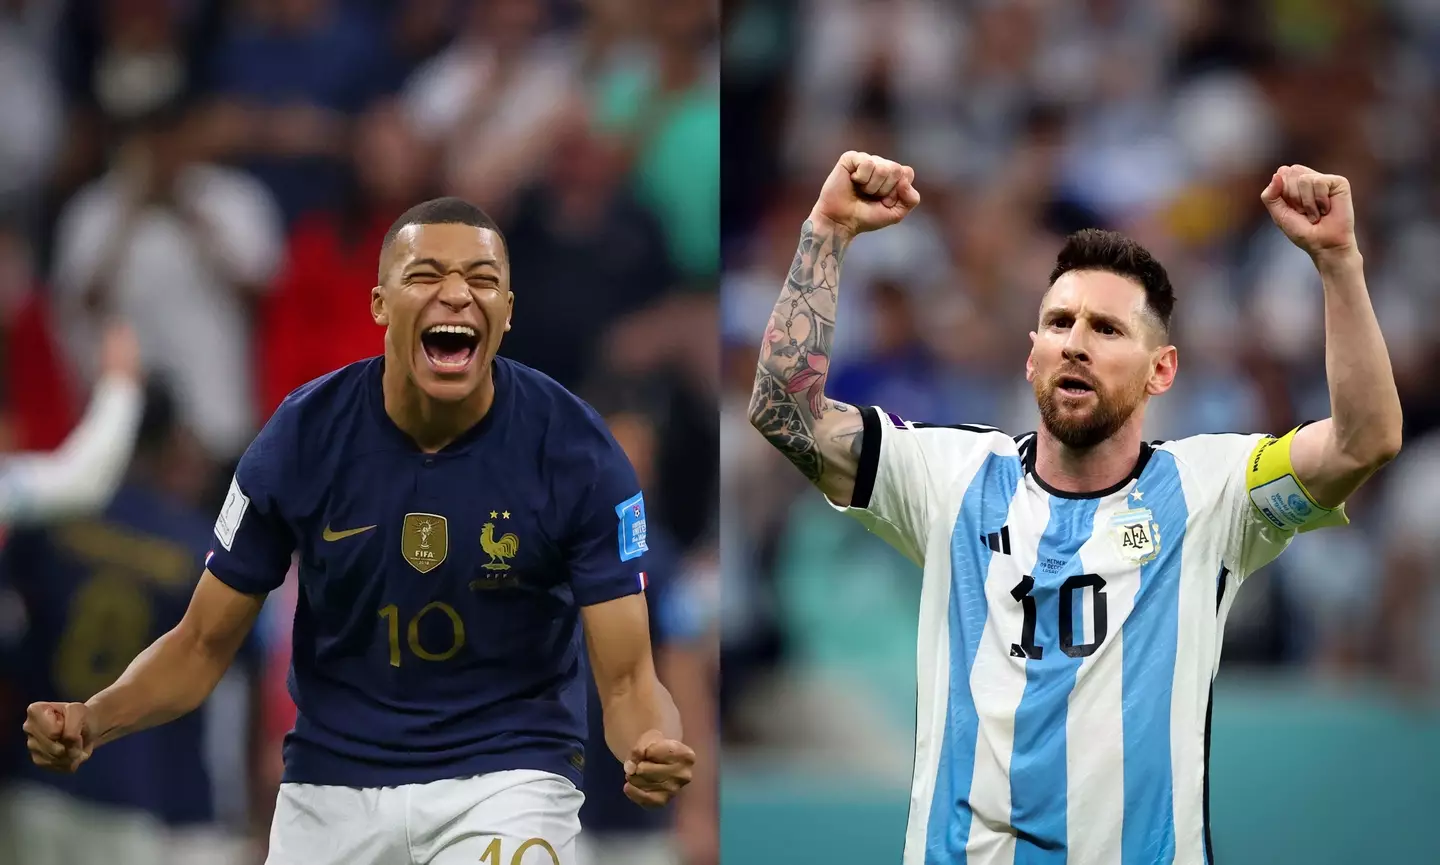 Mbappe and Messi are set to face off. Image: Alamy